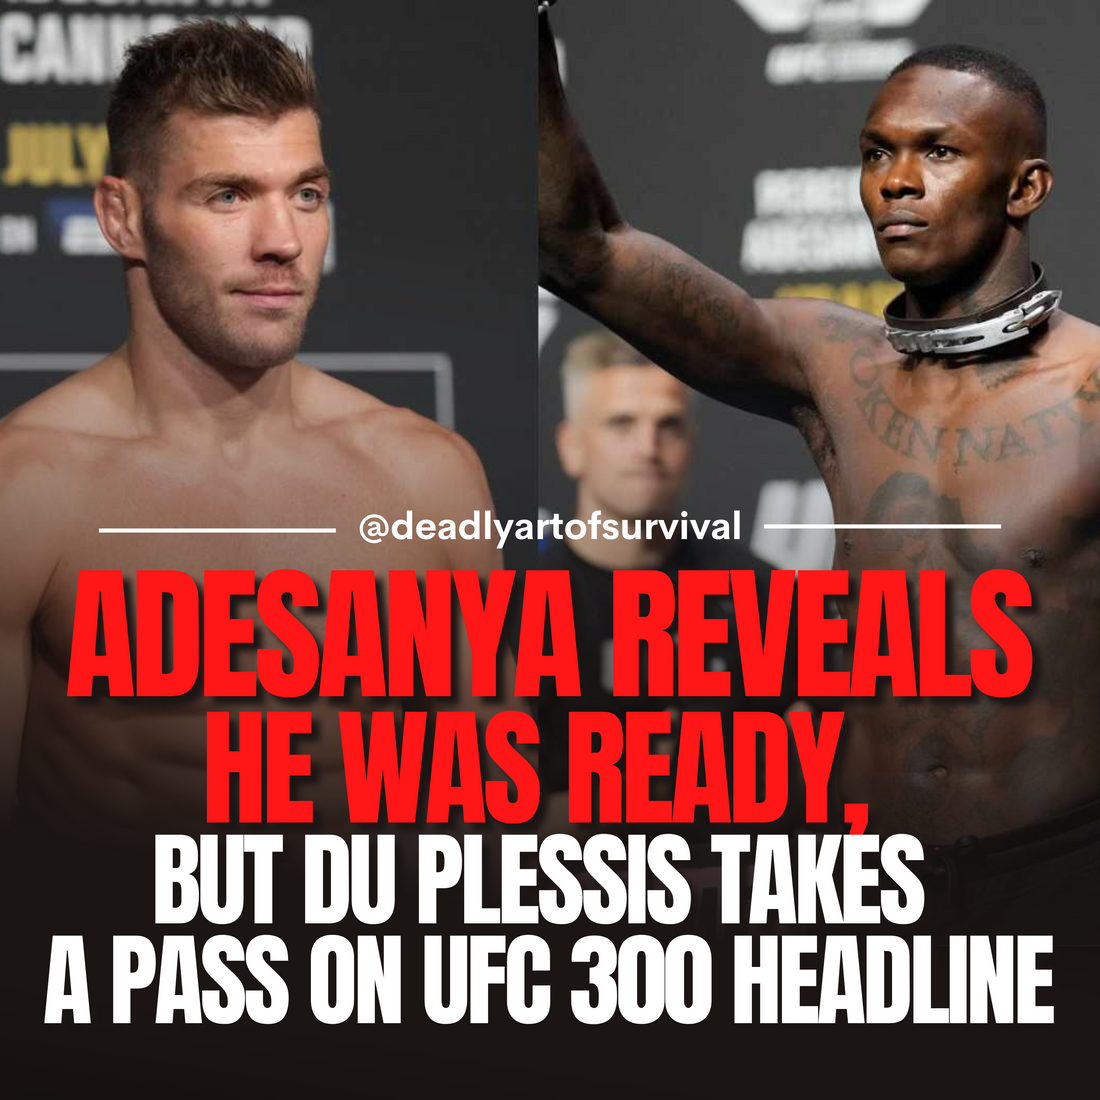 Adesanya-Ready-for-UFC-300-Main-Event-But-Du-Plessis-Takes-a-Pass deadlyartofsurvival.com